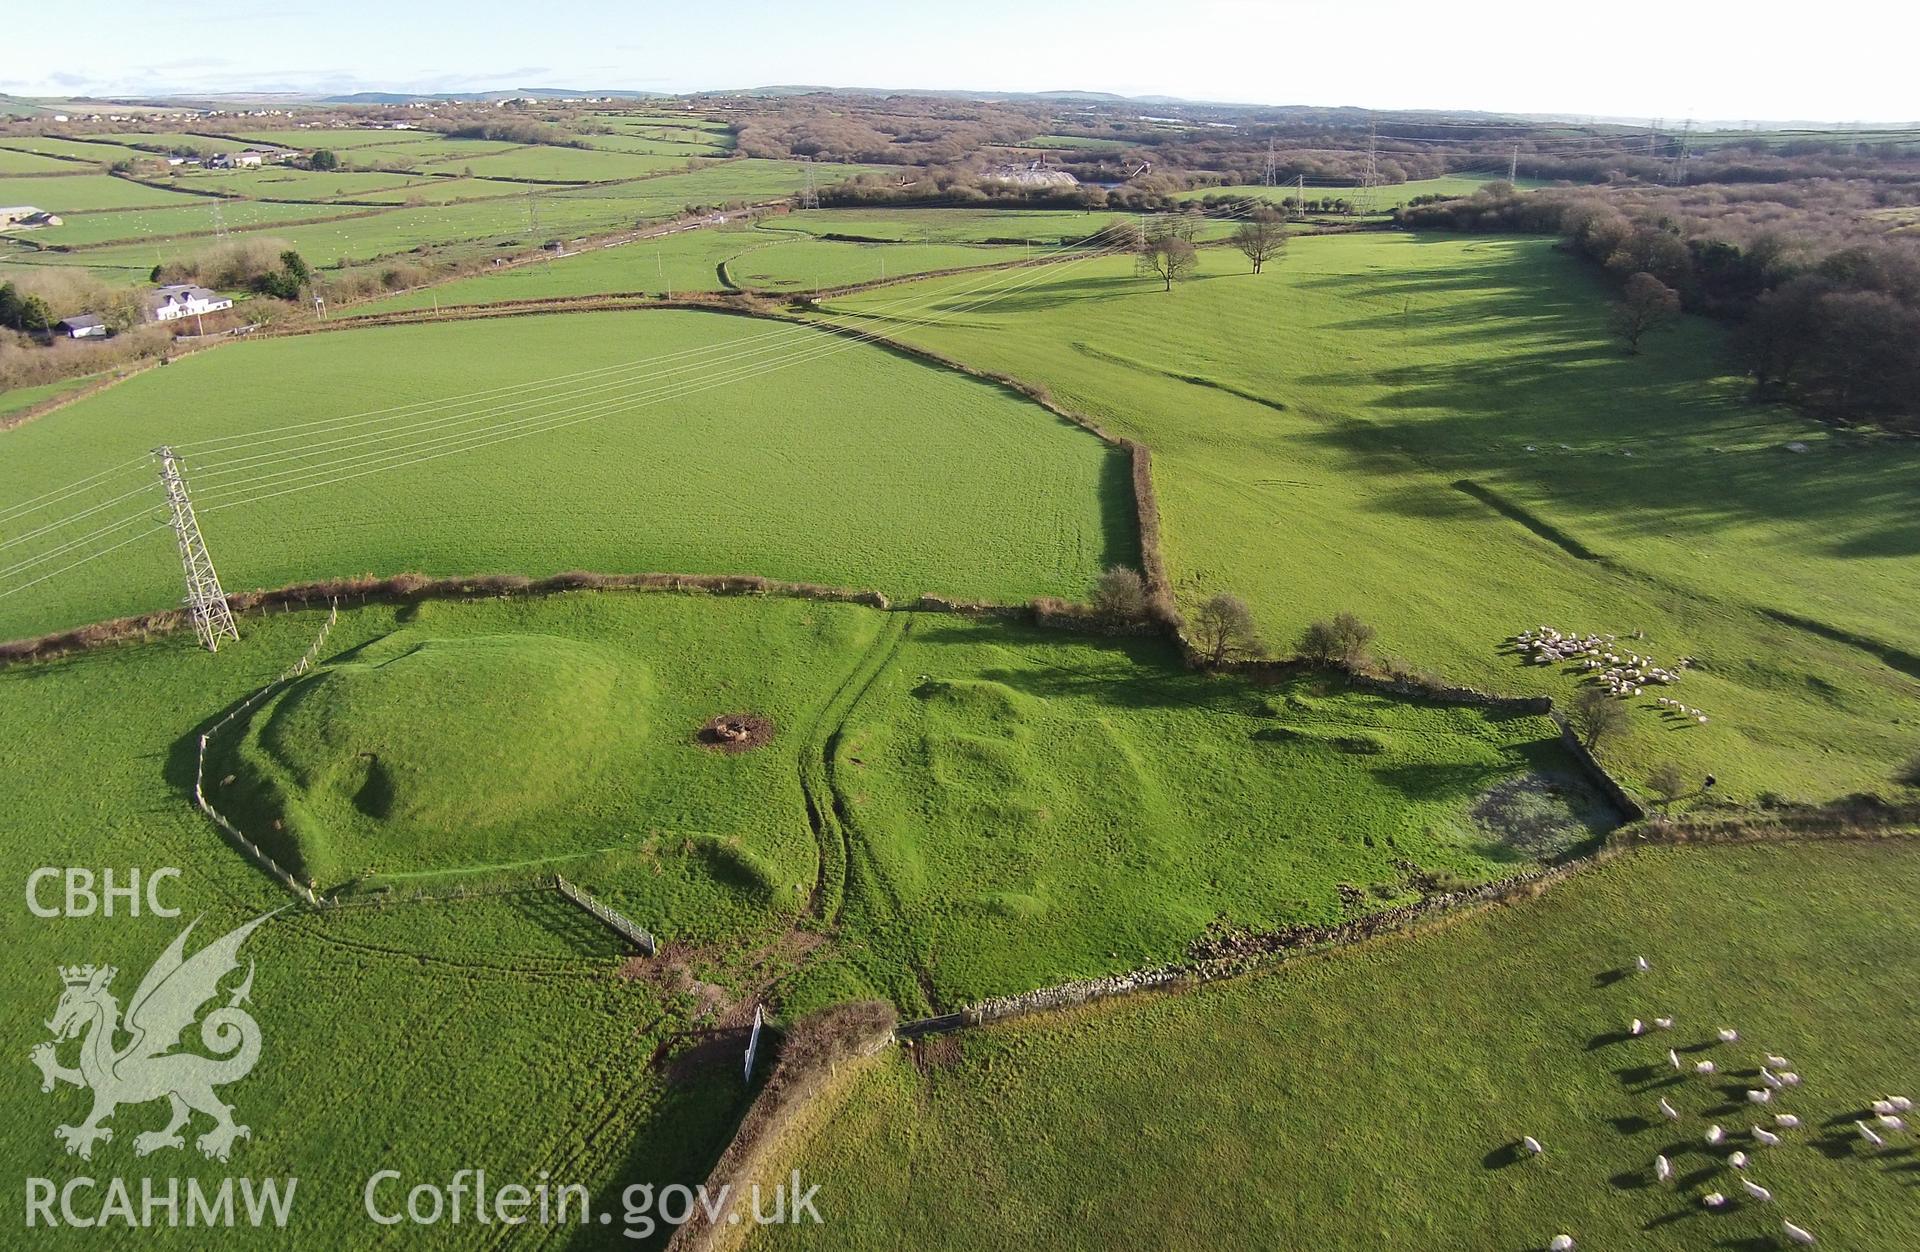 Aerial photograph showing Stormy Field System, taken by Paul Davis, 22nd November 2015.